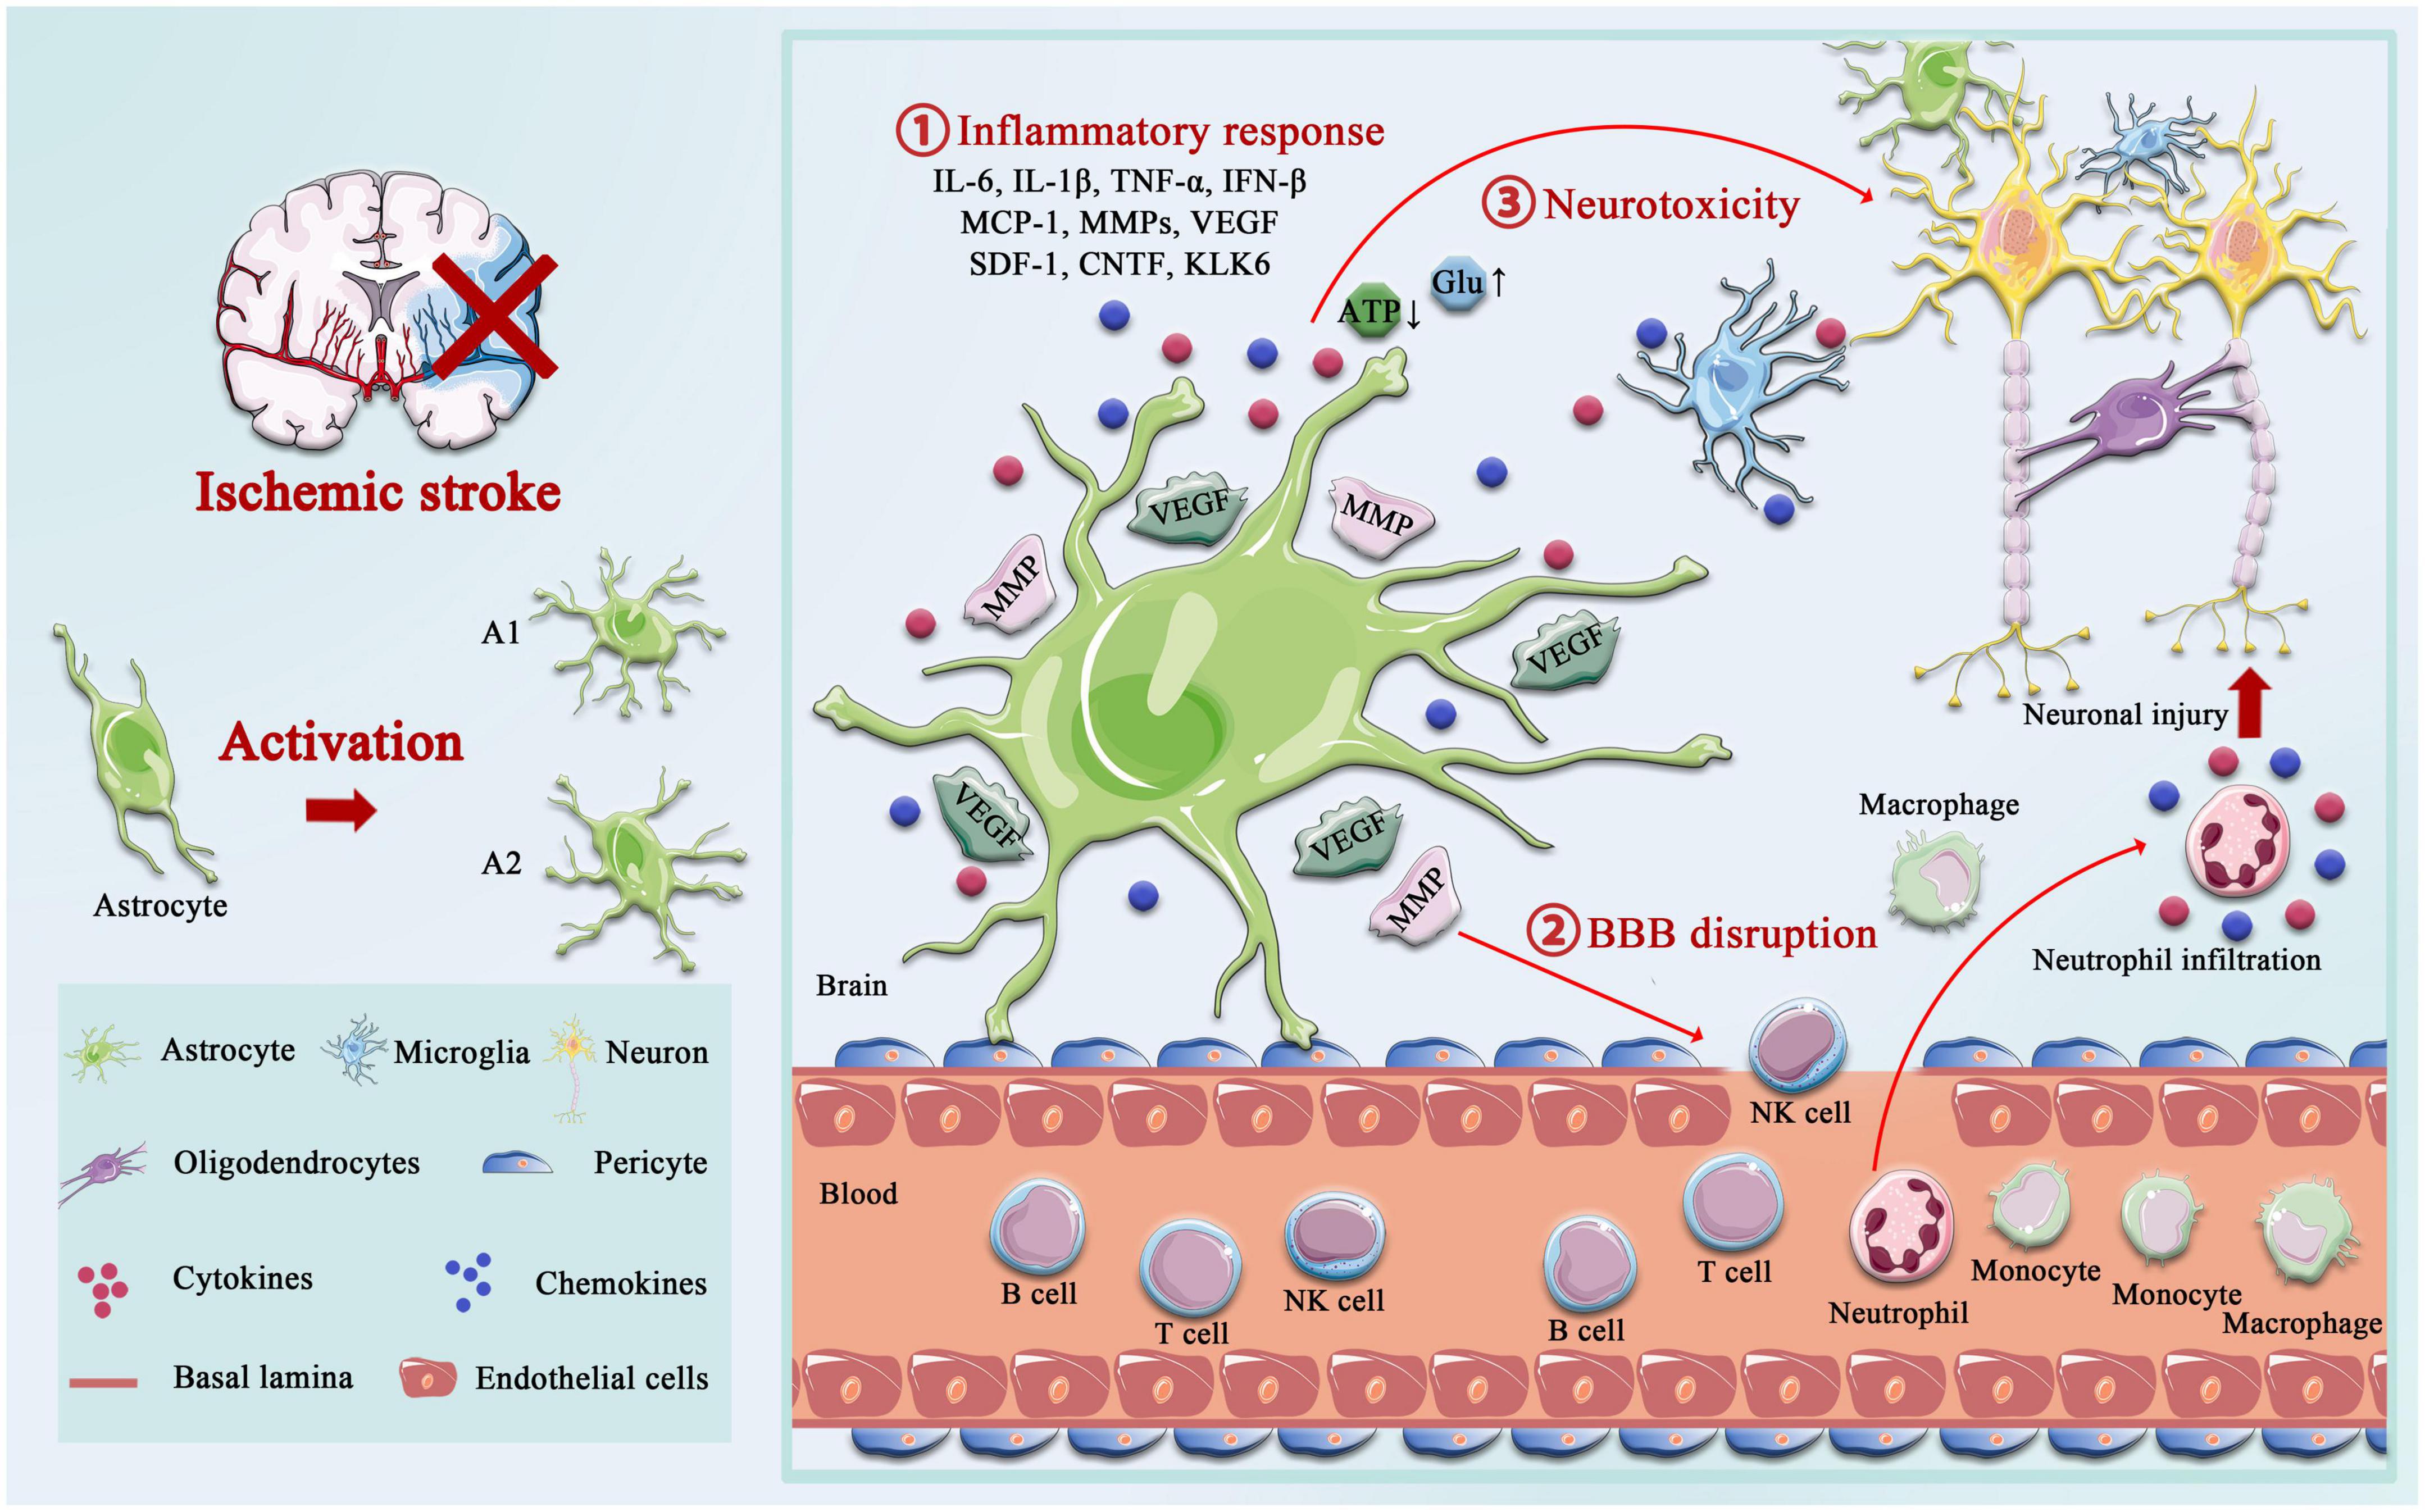 Frontiers  Astrocyte Glutamate Uptake and Signaling as Novel Targets for  Antiepileptogenic Therapy